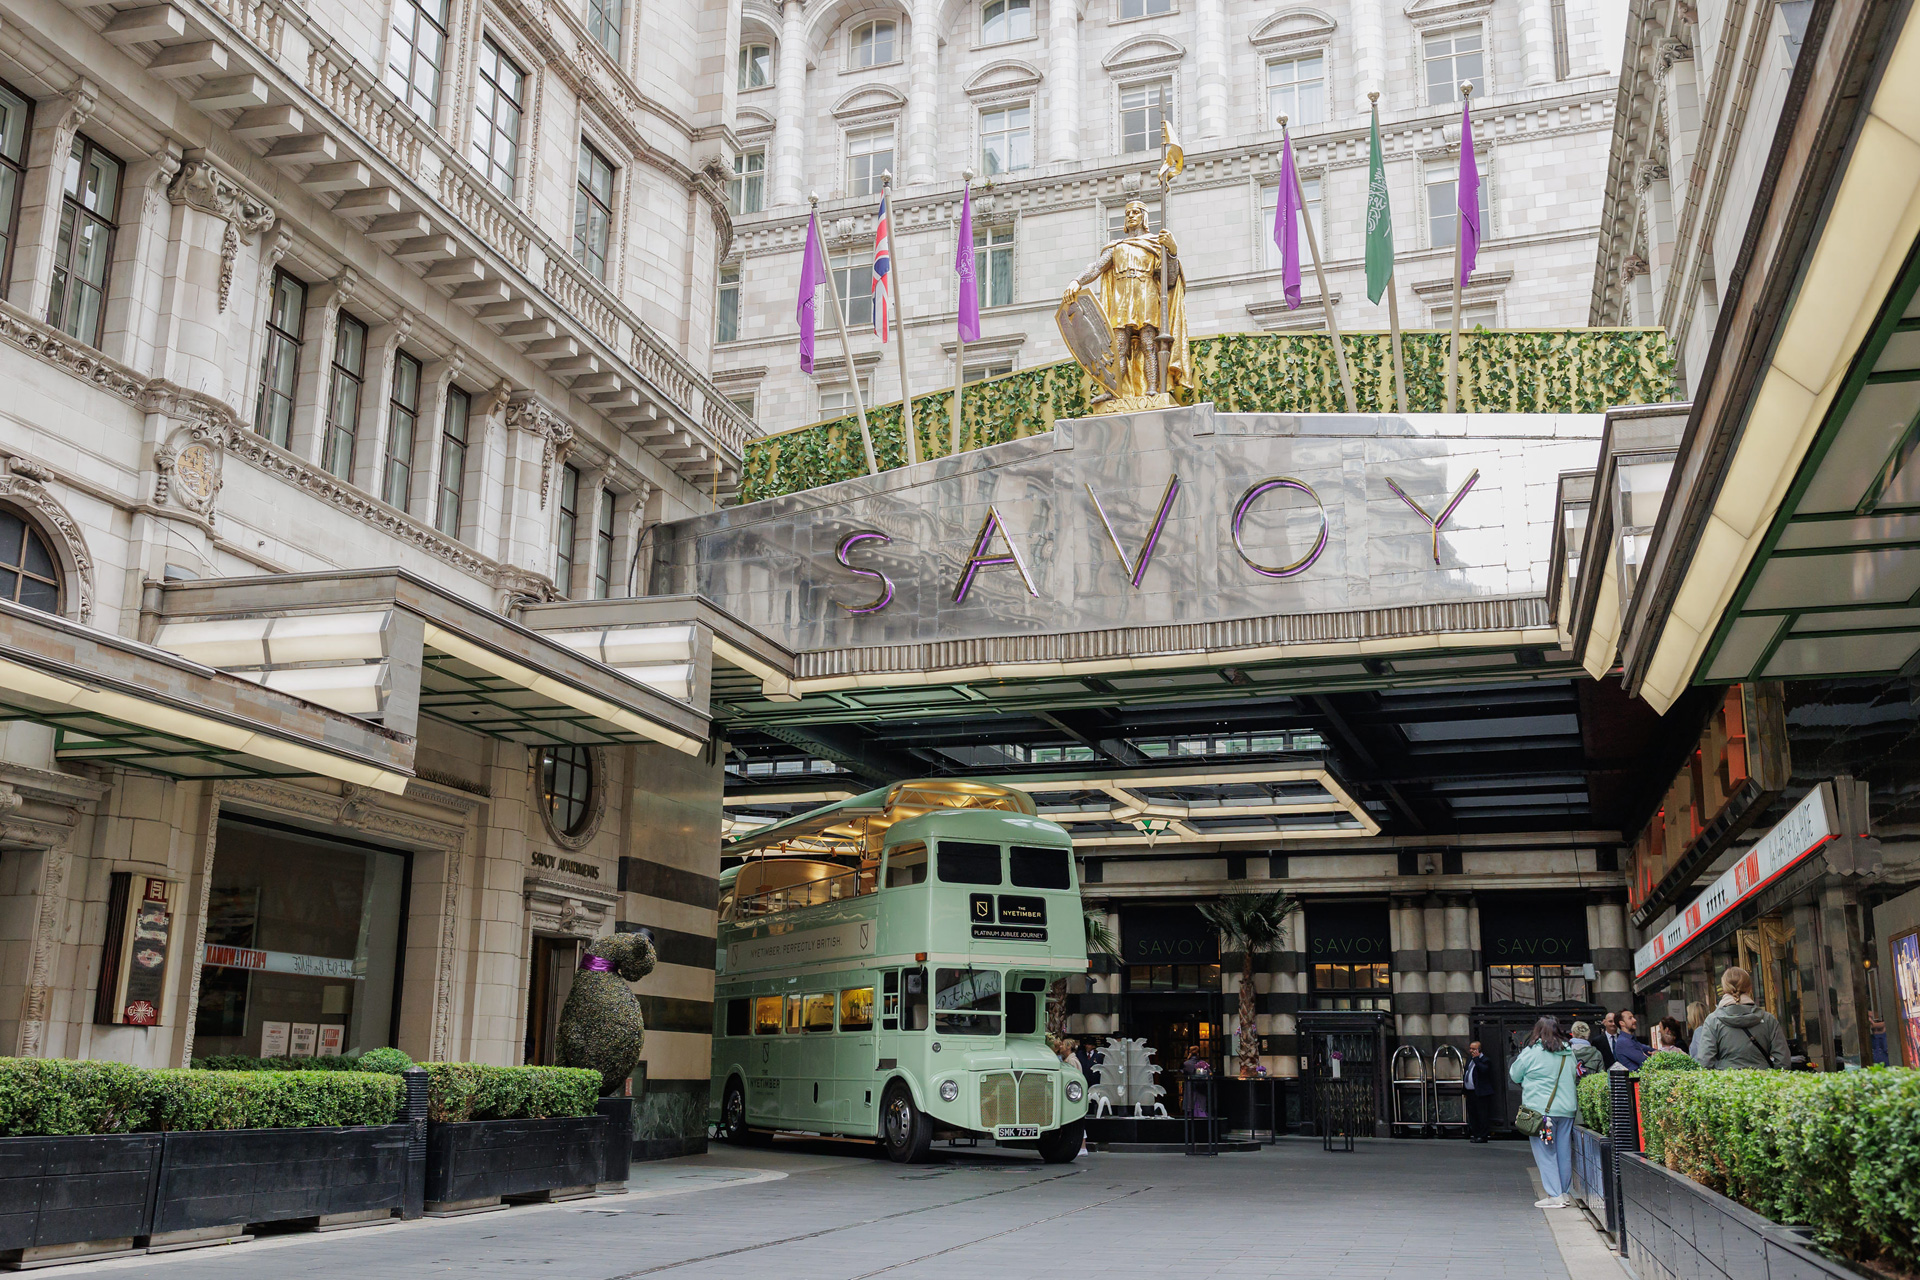 Nyetimber bus at The Savoy hotel in London